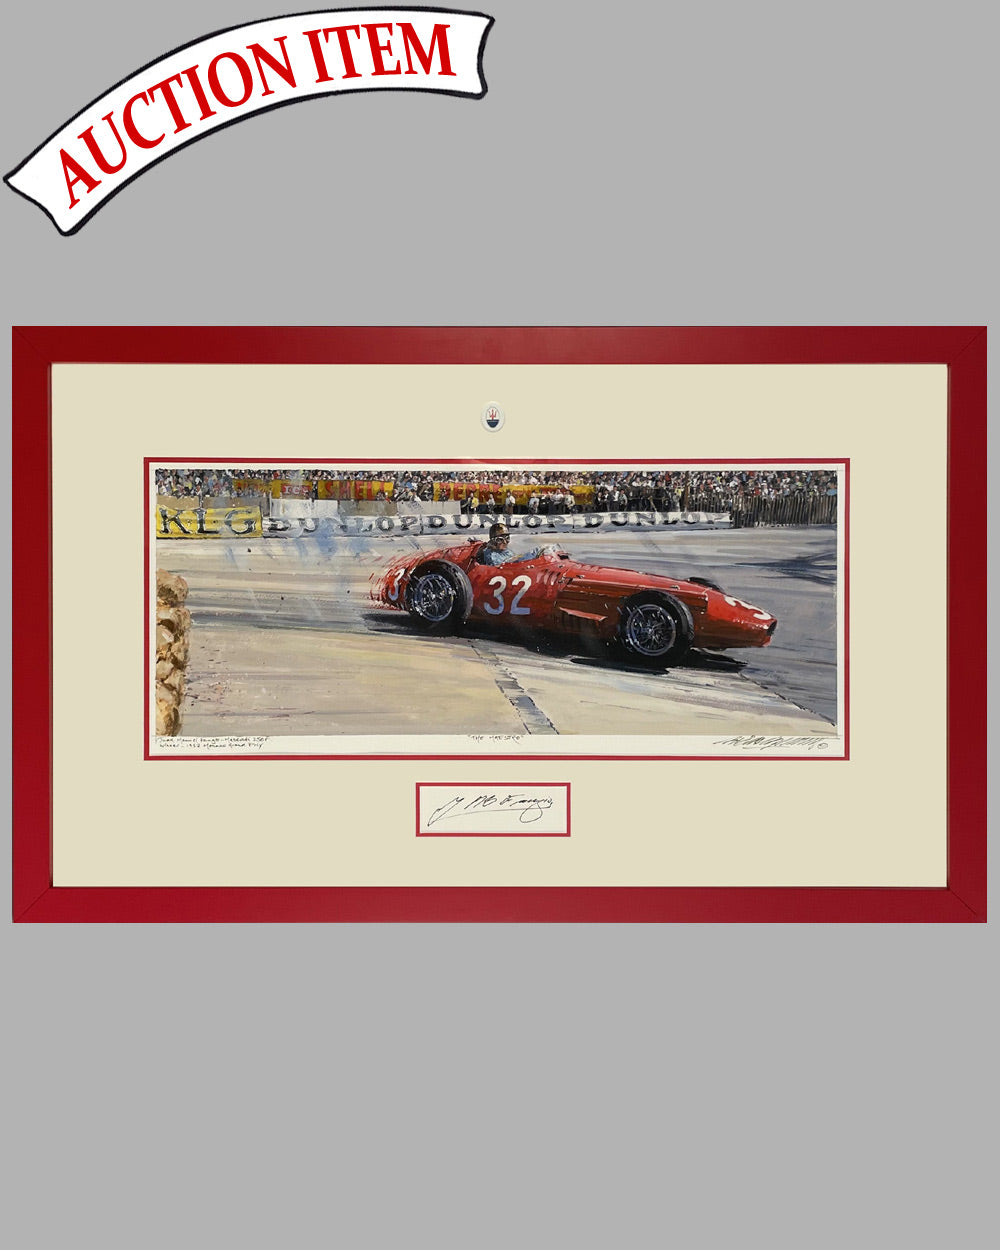 The Maestro painting by Nicholas Watts, autographed by Fangio